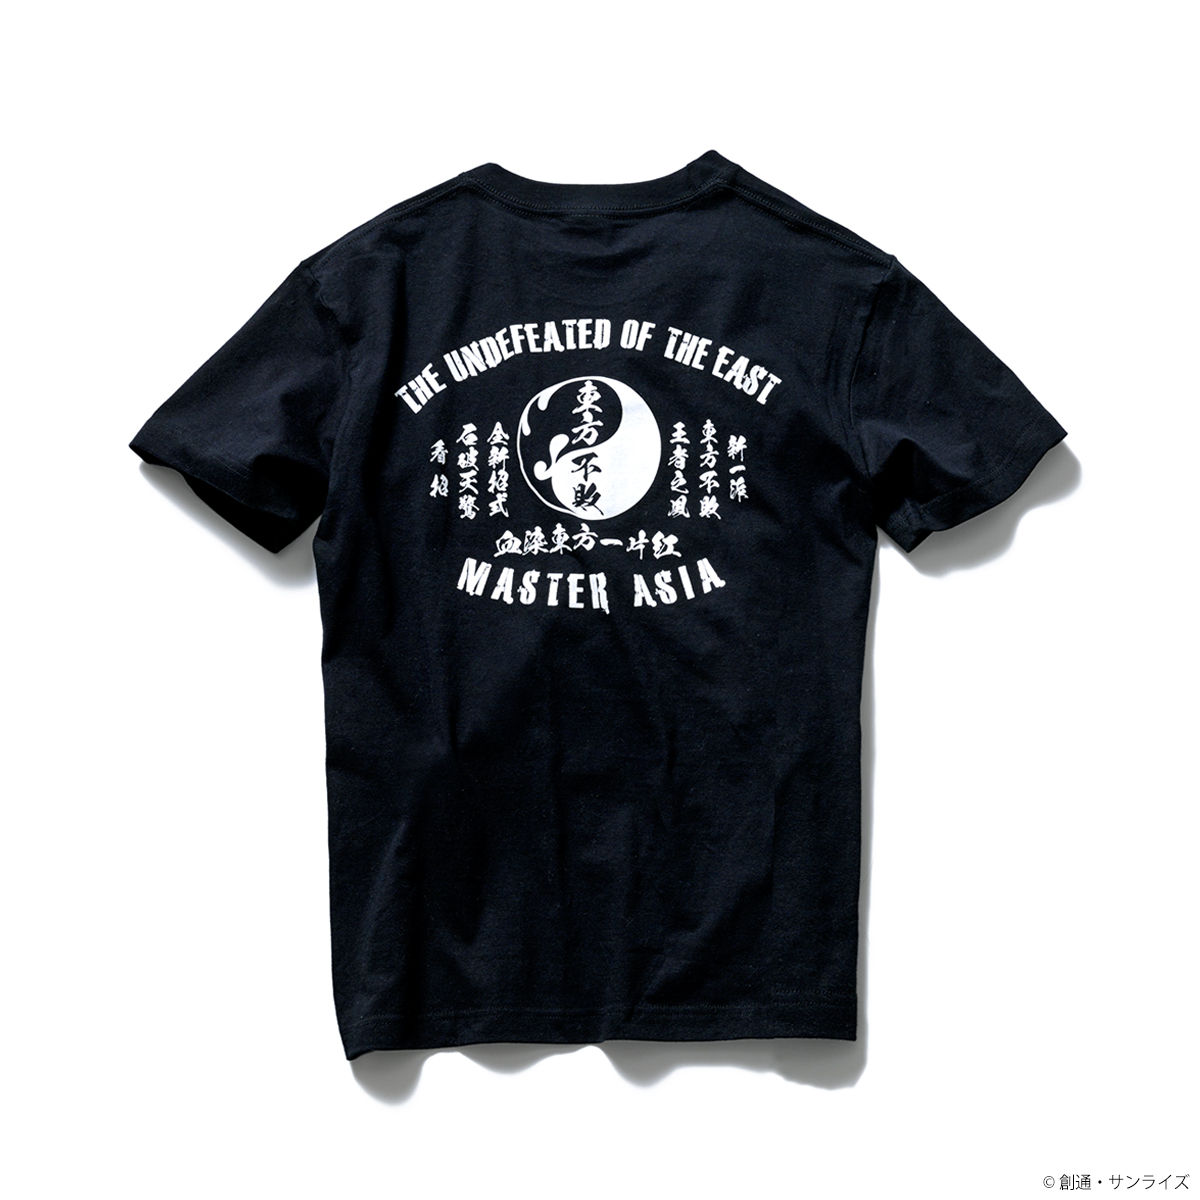 Undefeated of the East Emblem T-shirt—Mobile Fighter G Gundam/STRICT-G Collaboration